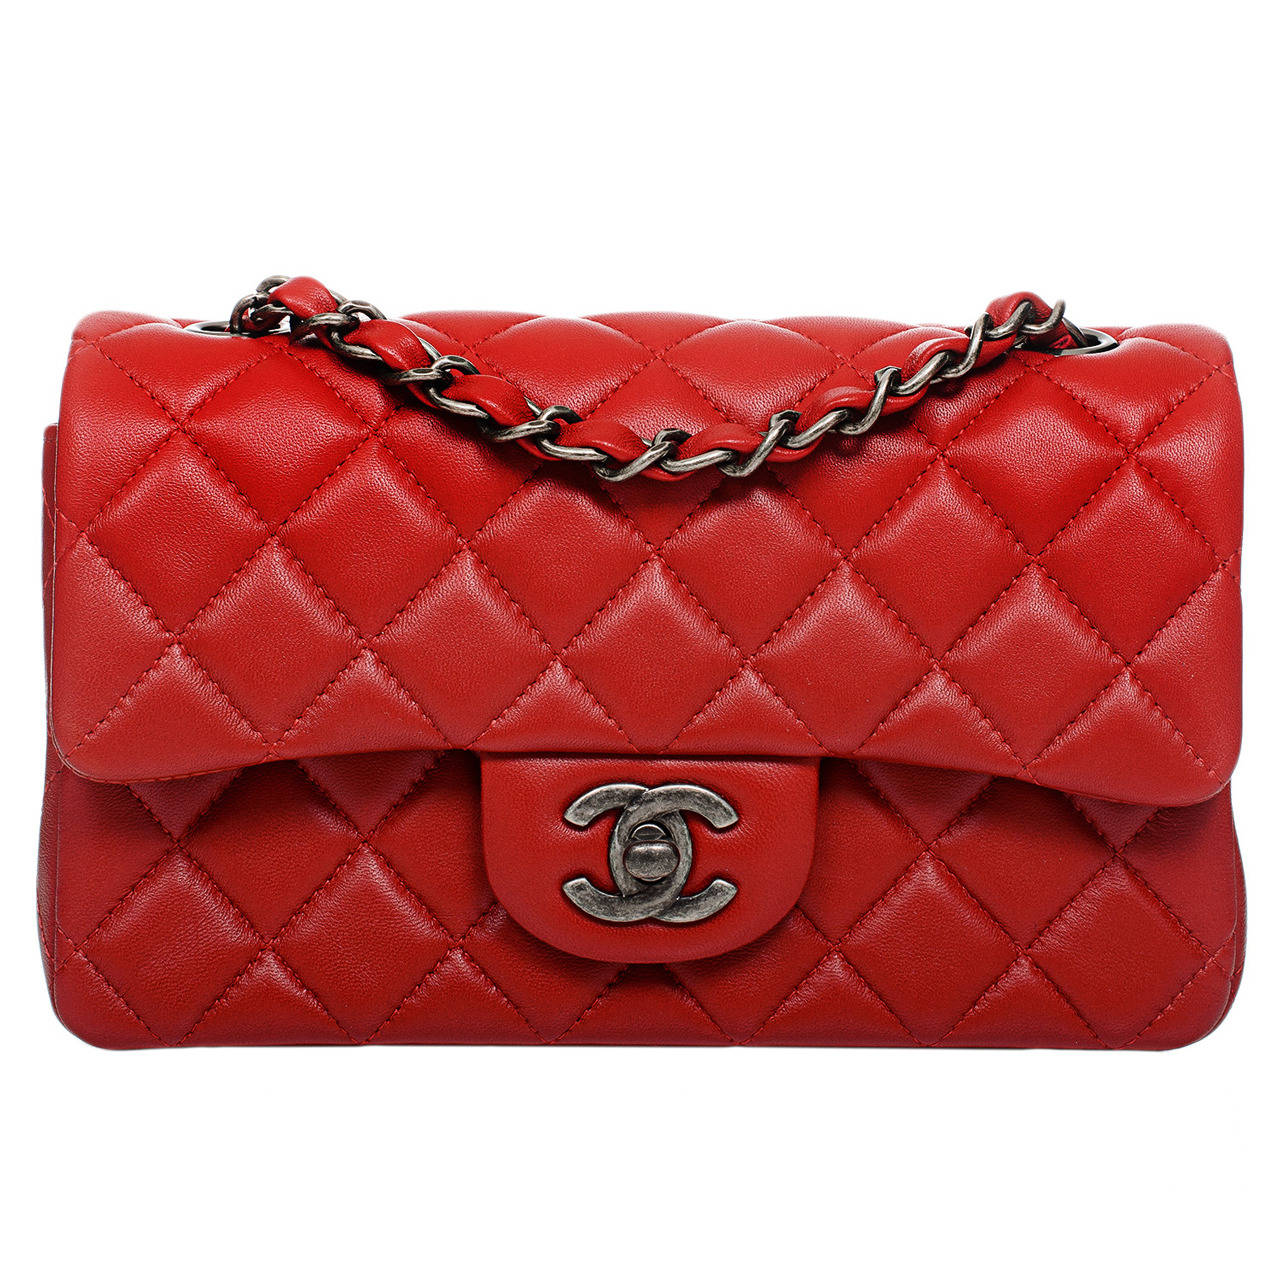 Chanel Red Quilted Lambskin Small Classic 2.55 Flap Bag